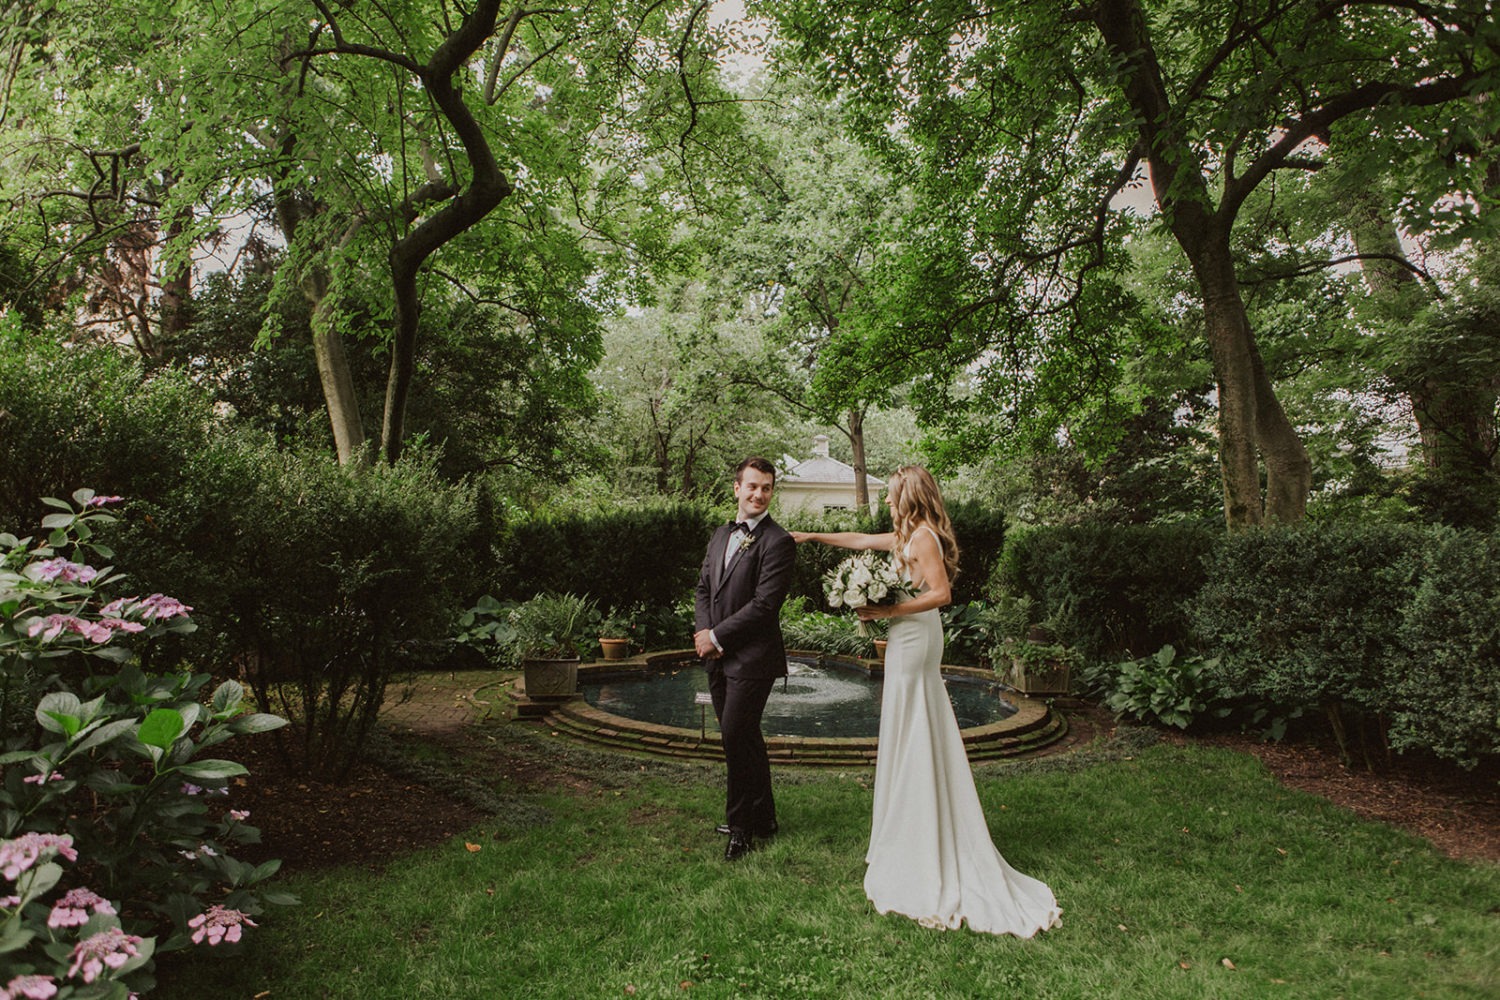 Couple has first look in garden at Georgetown Tudor Place wedding